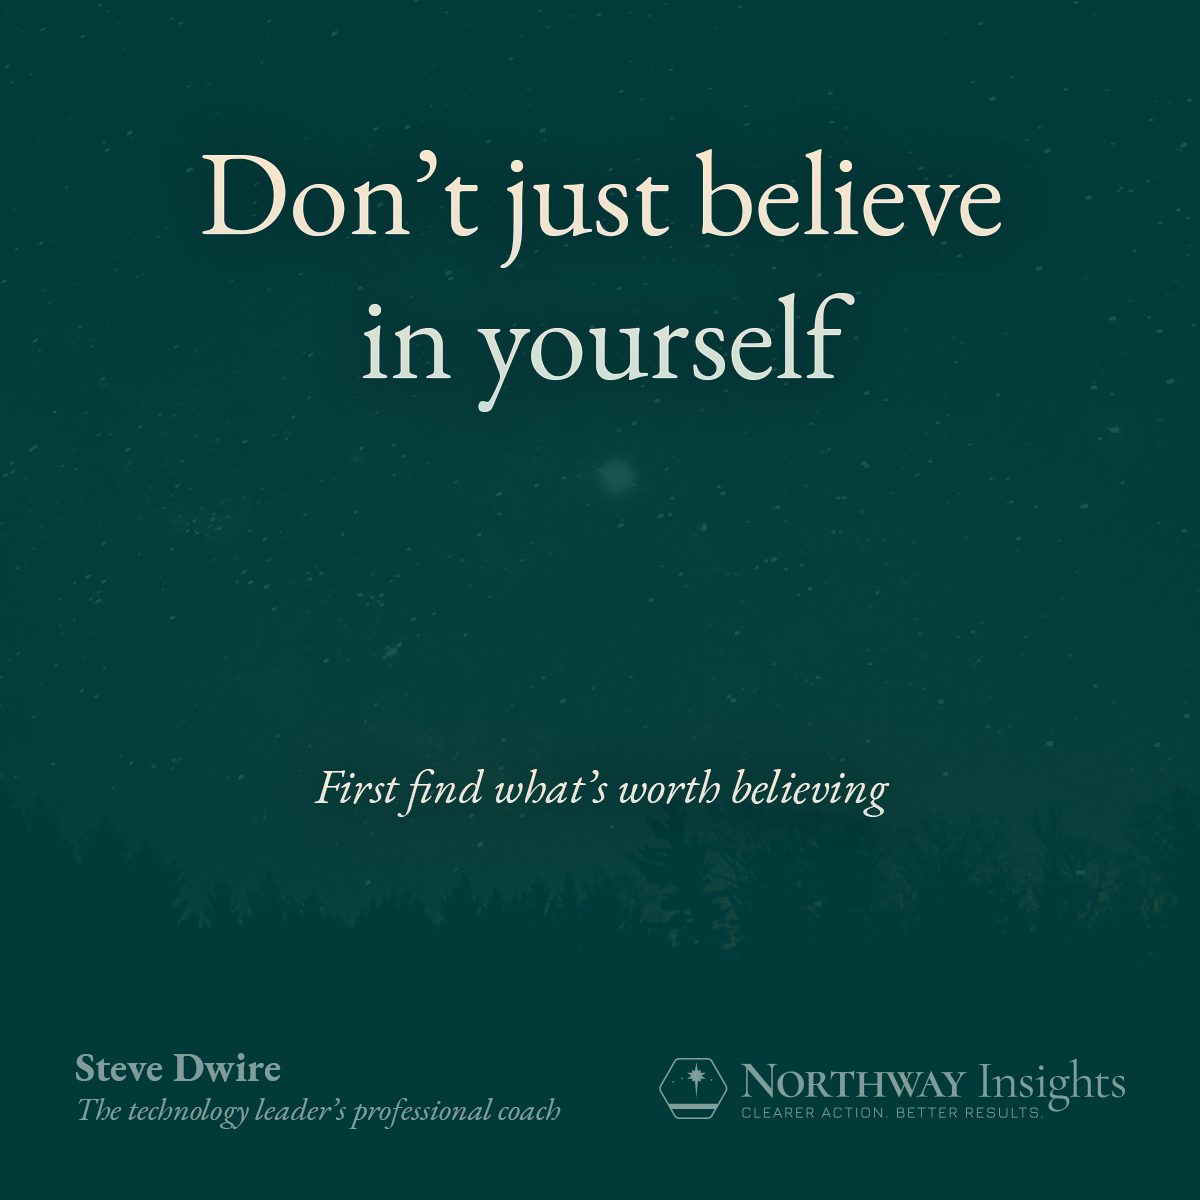 Don’t just believe in yourself